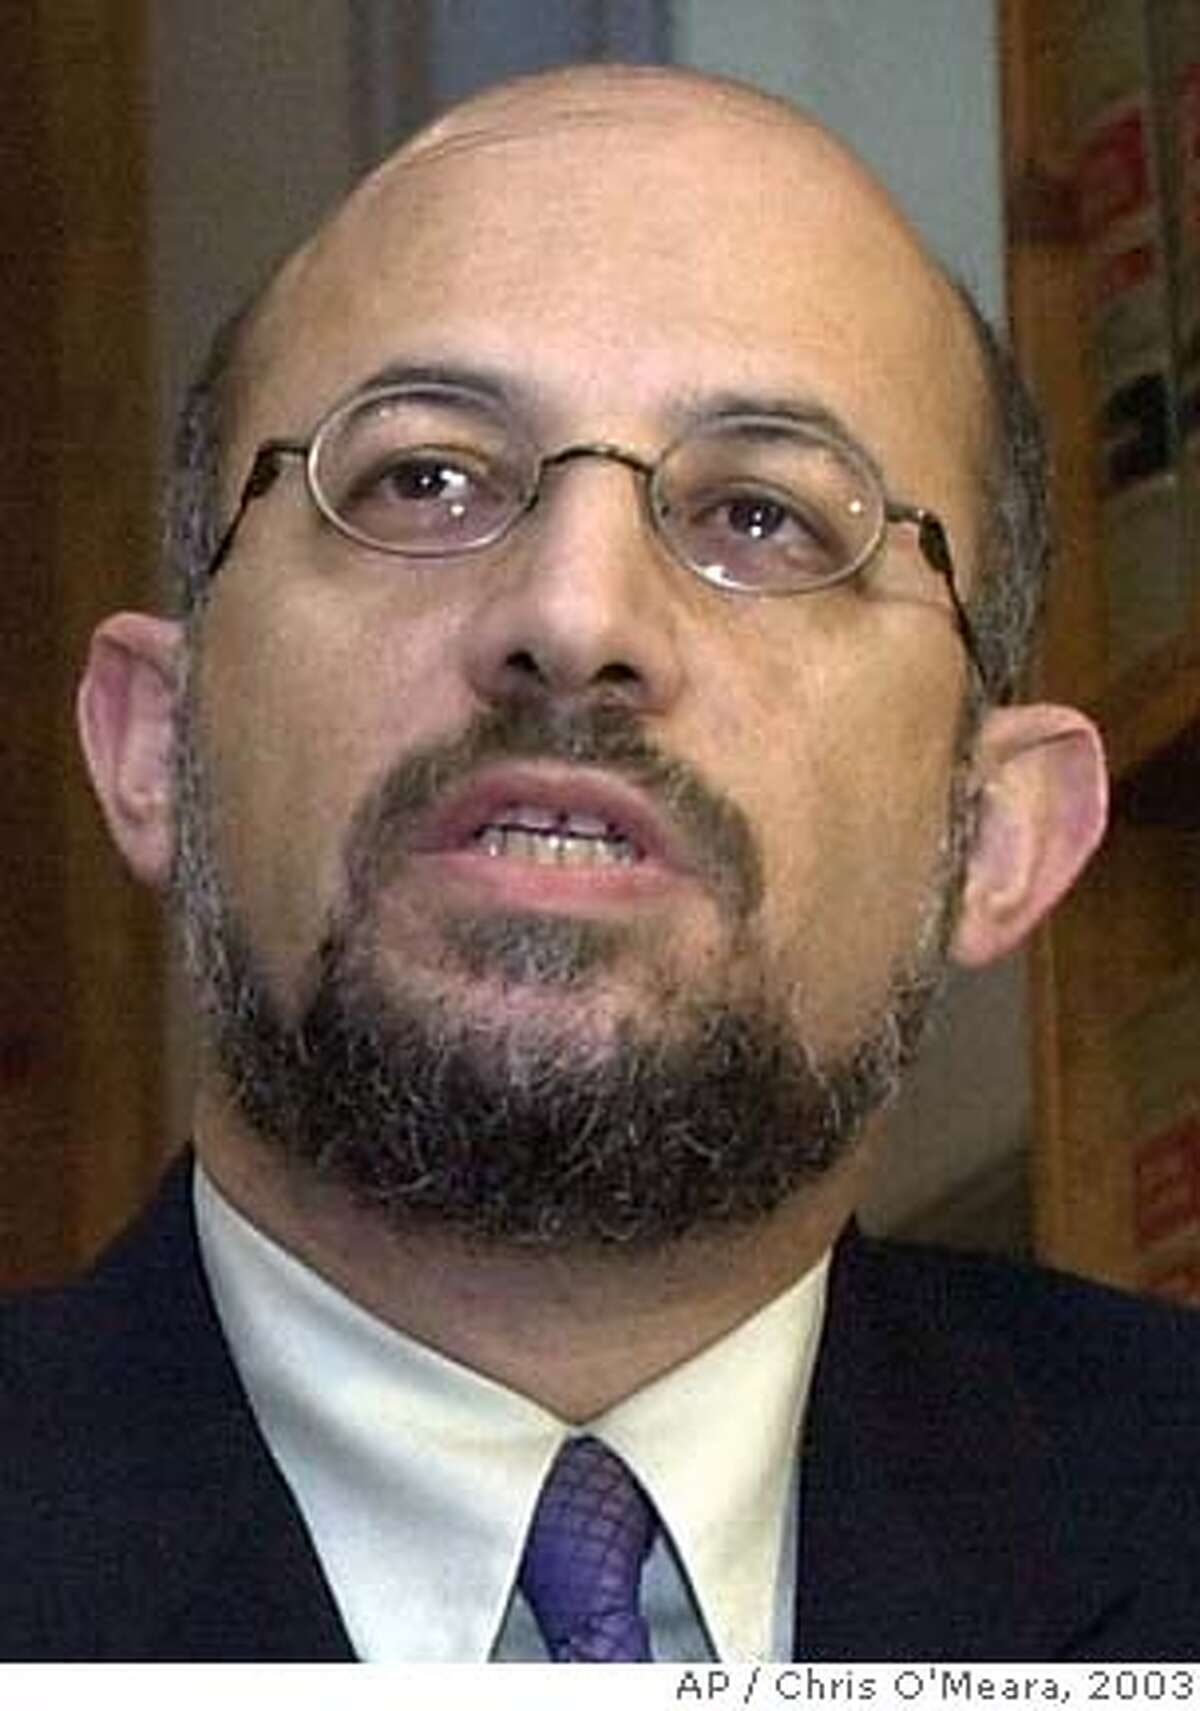 ** FILE ** Suspended University of South Florida professor Sami Al-Arian is seen in a Jan. 6, 2003, file photo in Tampa, Fla. Nearly a year after Al-Arian and seven others were named in a 50-count racketeering indictment, the case is shaping up to be a test of the Patriot Act. The legal battle lines are drawn by Al-Arian's defense team and by Al-Arian himself, who for years has said he is being persecuted for his pro-Palestinian, anti-Israeli views. (AP Photo/Chris O'Meara, File) JAN. 6, 2003, FILE PHOTO Sami Al-Arian (left) and his brother-in-law, Mazen Al-Najjar, are accused of having ties to the Palestinian Islamic Jihad.